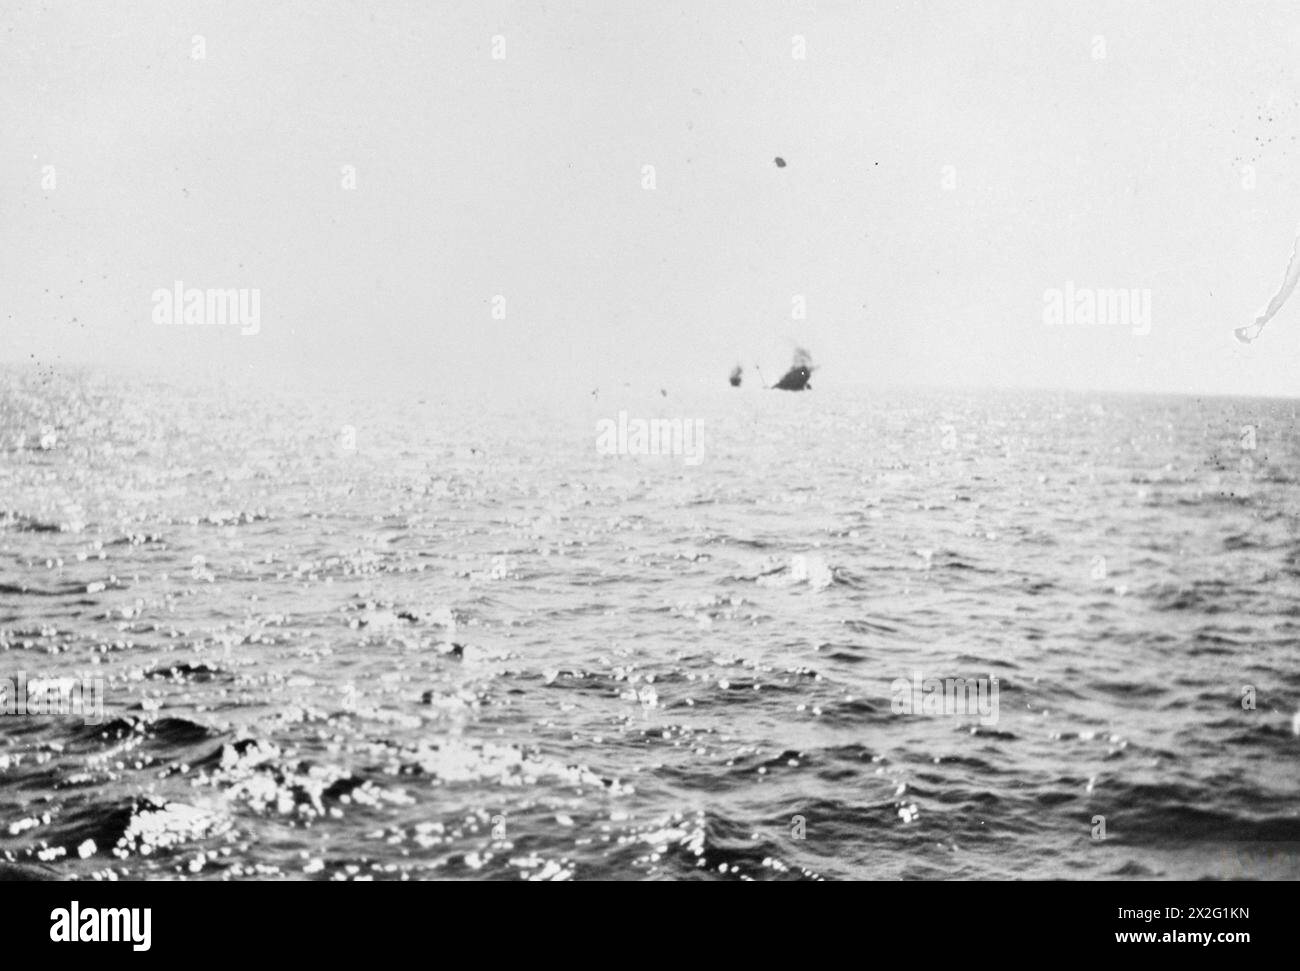 THE INTERCEPTION AND SCUTTLING OF THE GERMAN SS IDARWALD. 8 AND 9 DECEMBER 1940, ON BOARD A BRITISH WARSHIP OFF CUBA. THE GERMAN HAMBURG-AMERIKA FREIGHTER IDARWALD WAS INTERCEPTED BY A PATROLLING BRITISH WARSHIP OFF CUBA. THE GERMAN CREW AT ONCE SCUTTLED THEIR SHIP, SET FIRE TO HER, AND TOOK TO THEIR BOATS. THE BRITISH SHIP FOUGHT THE FIRE AND TOOK THE IDARWALD IN TOW, BUT SHE HAD TO BE CAST OFF SHORTLY THEREAFTER AND SANK. - The IDARWALD sinks Stock Photo